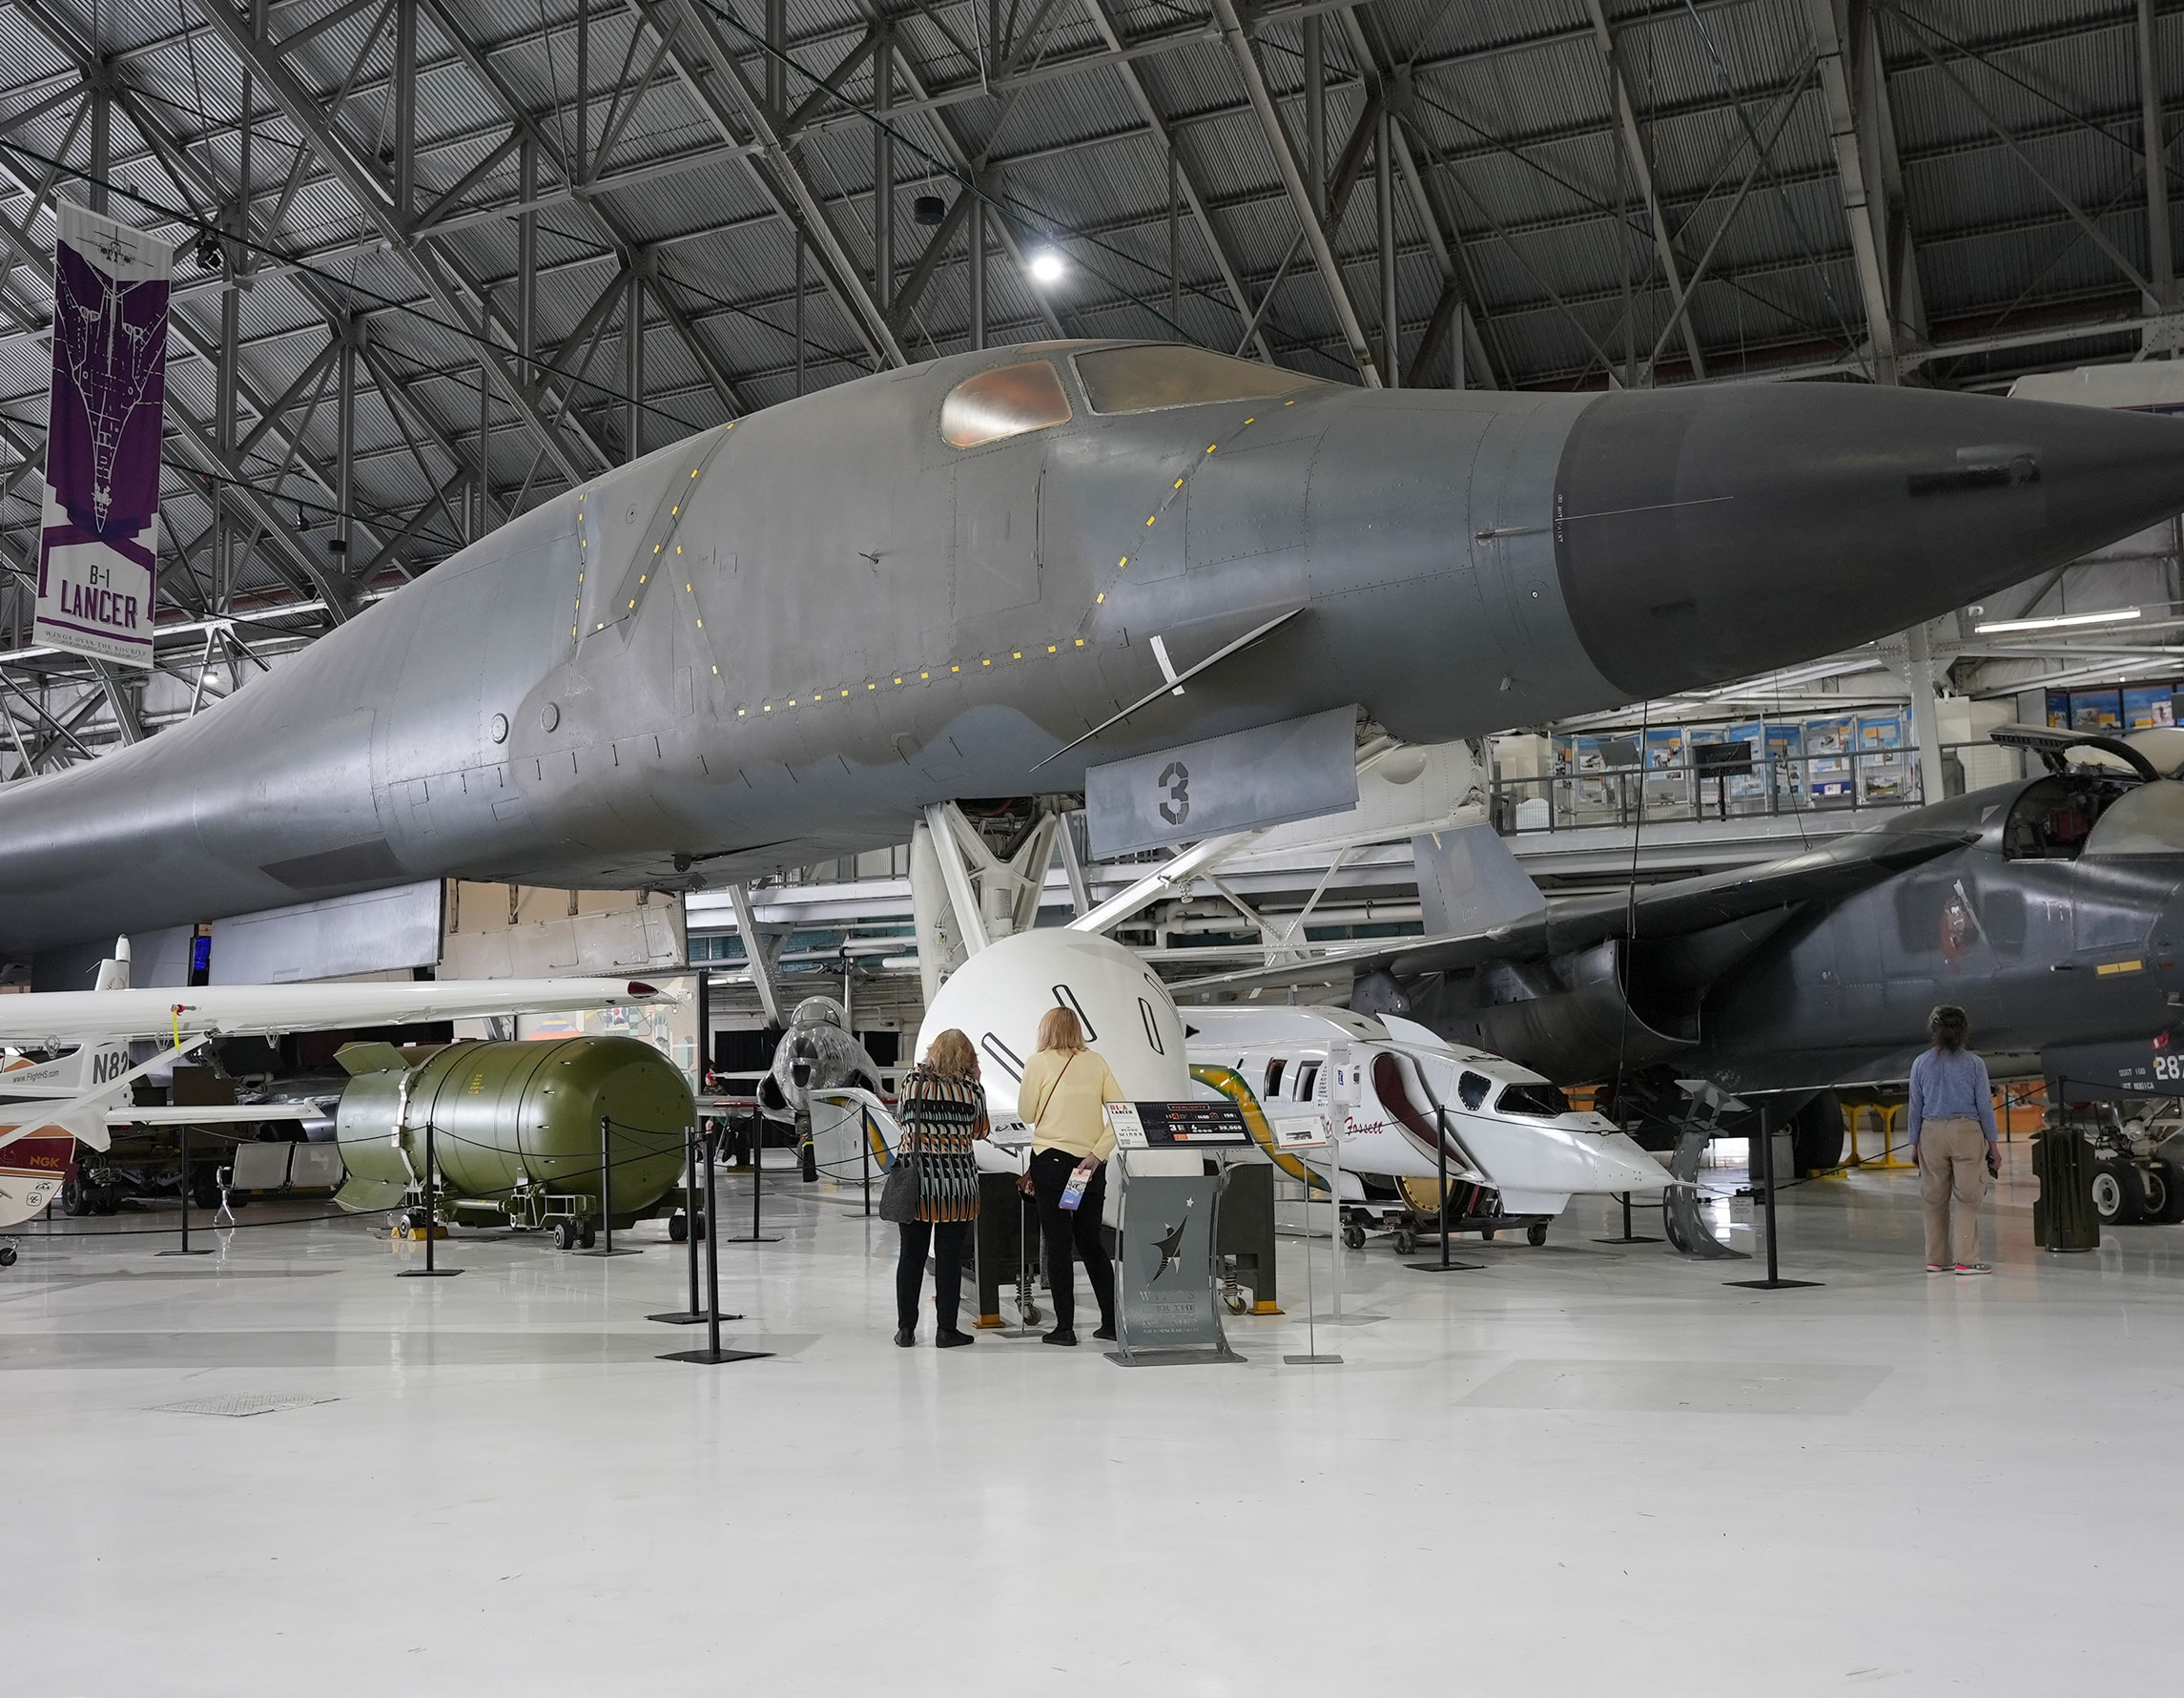 Guests standing under the B-1A Lancer at the Air & Space Museum